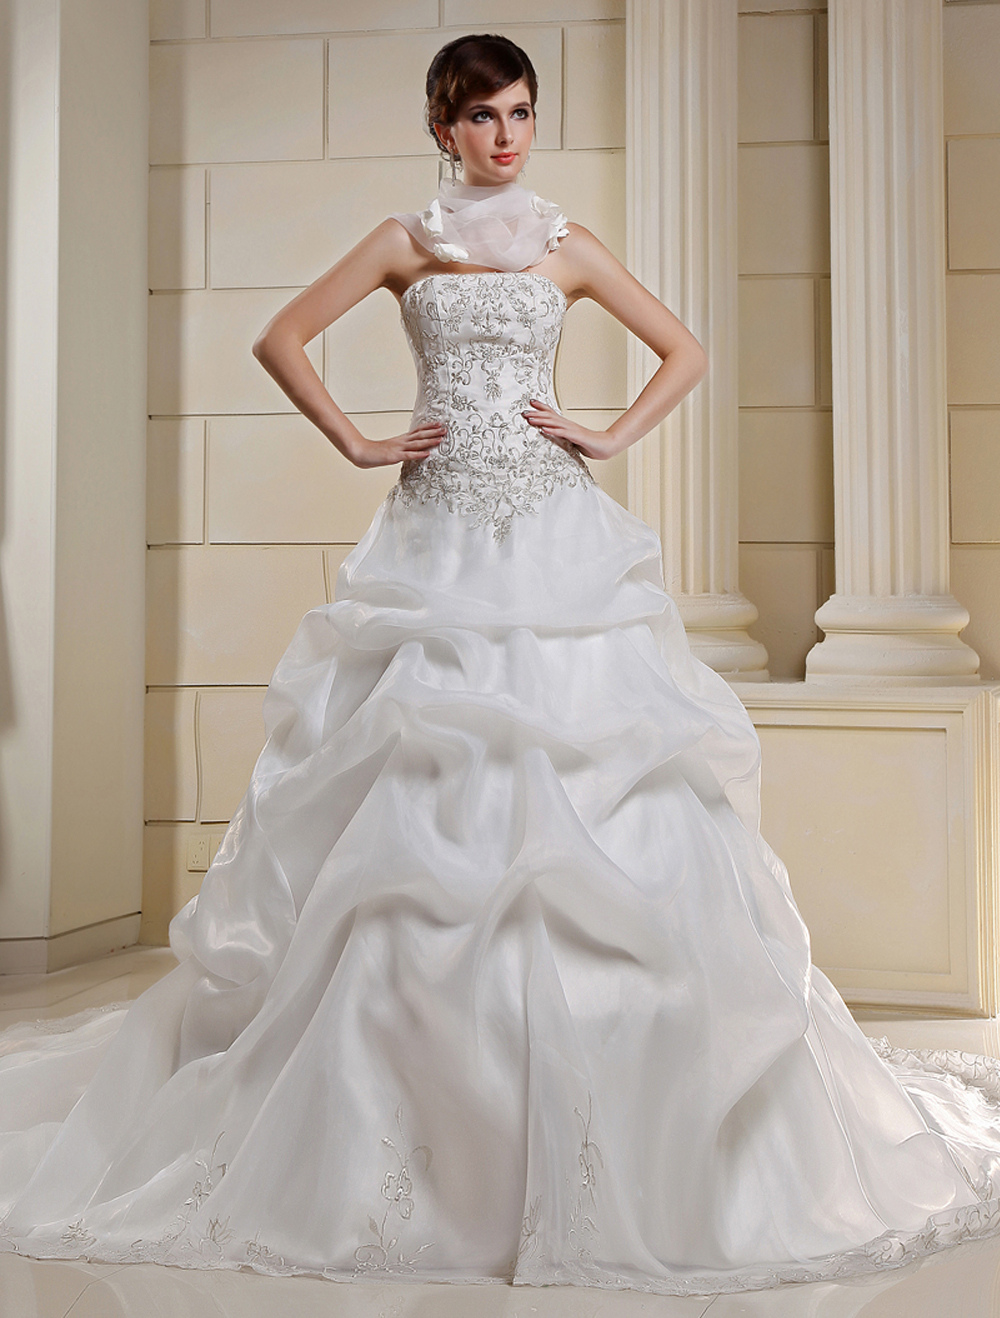 Wedding Dresses Ball Gown Style With Lots Of Beading Bestweddingdresses